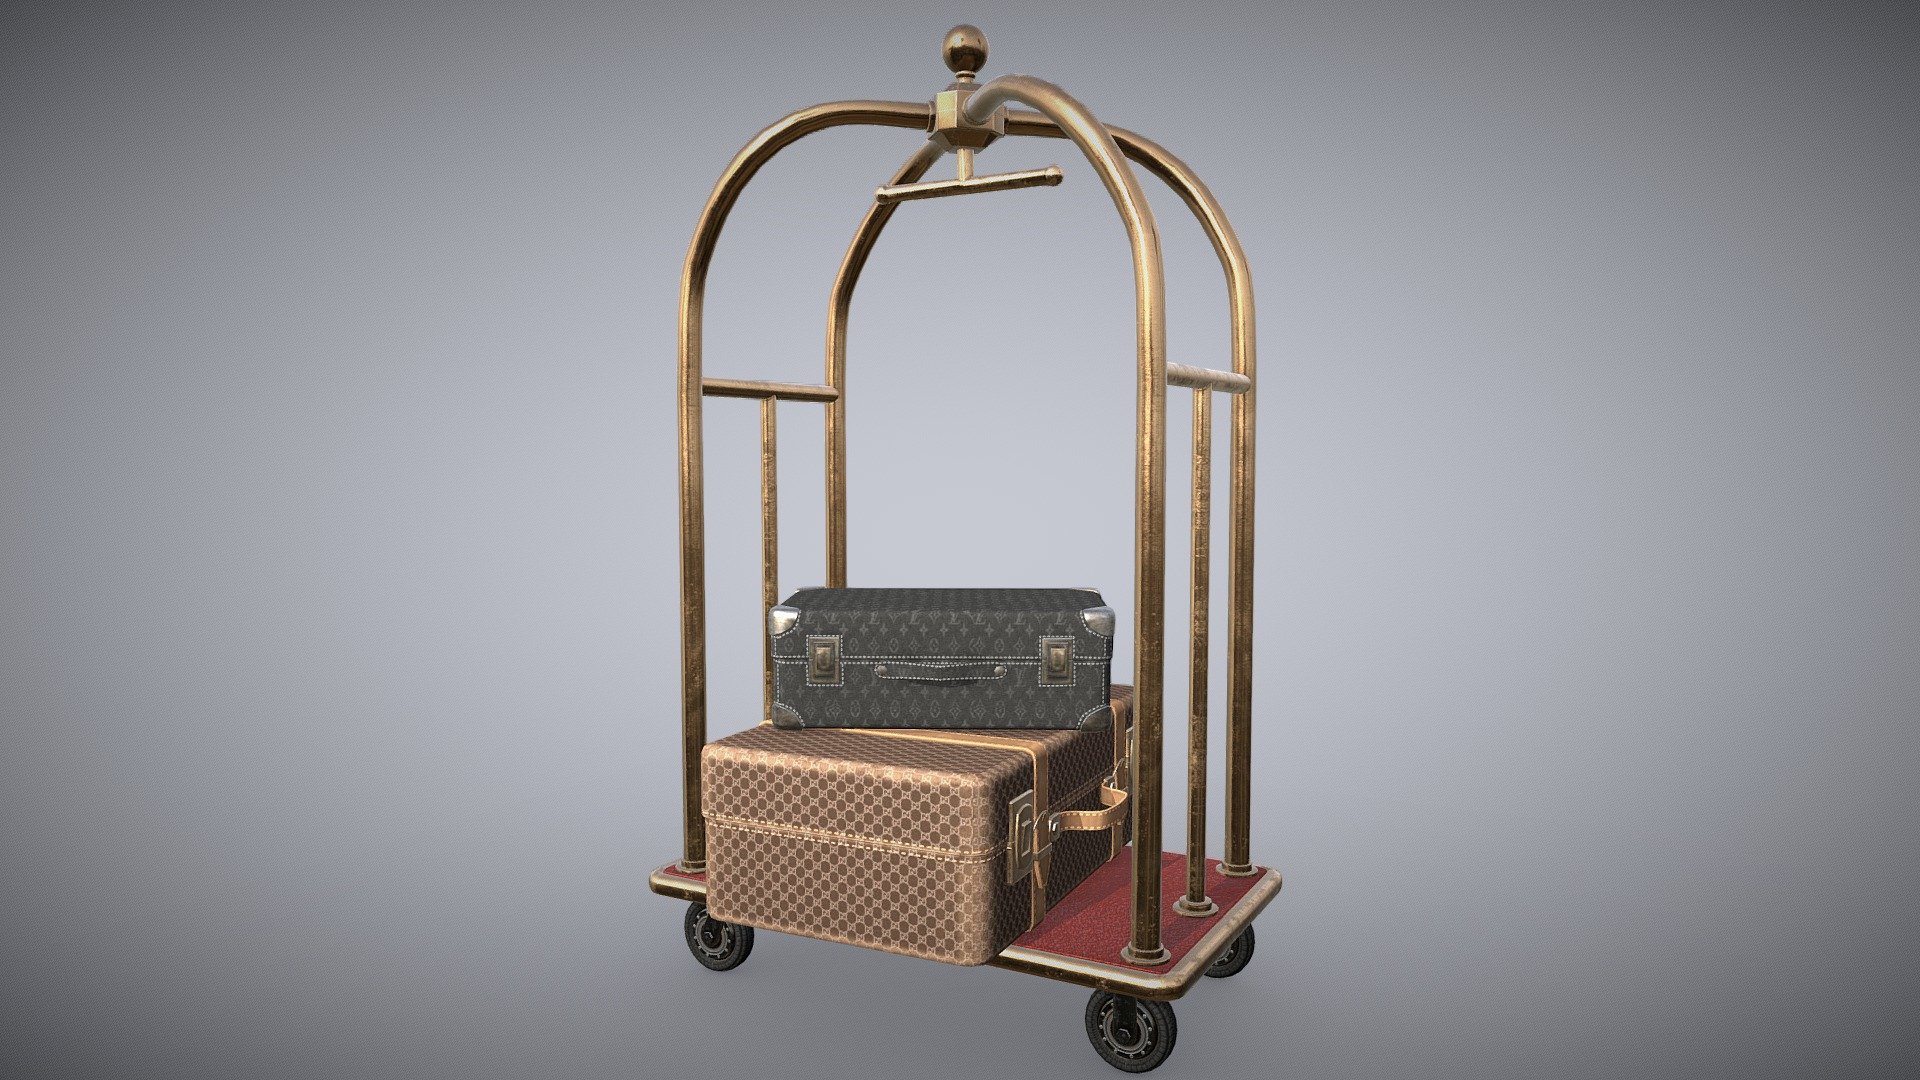 Hotel luggage trolley PBR low-poly game ready
all models are separated
Polygons 7840
Vertices 7961
Textures_2K_4K -JPEG,PNG (Unreal Engine 4)
textures contains threetexture set : 2K_4K (Diffuse,Normal,
Metalness,Roughness,AO)
Archive Textures consist full PBR_JPEG texture set.
Original designed no IP required.
Royalty free this mean you can use this product in any 
commercial and noncommercial purpose but you can't resale
this asset as is 3d model